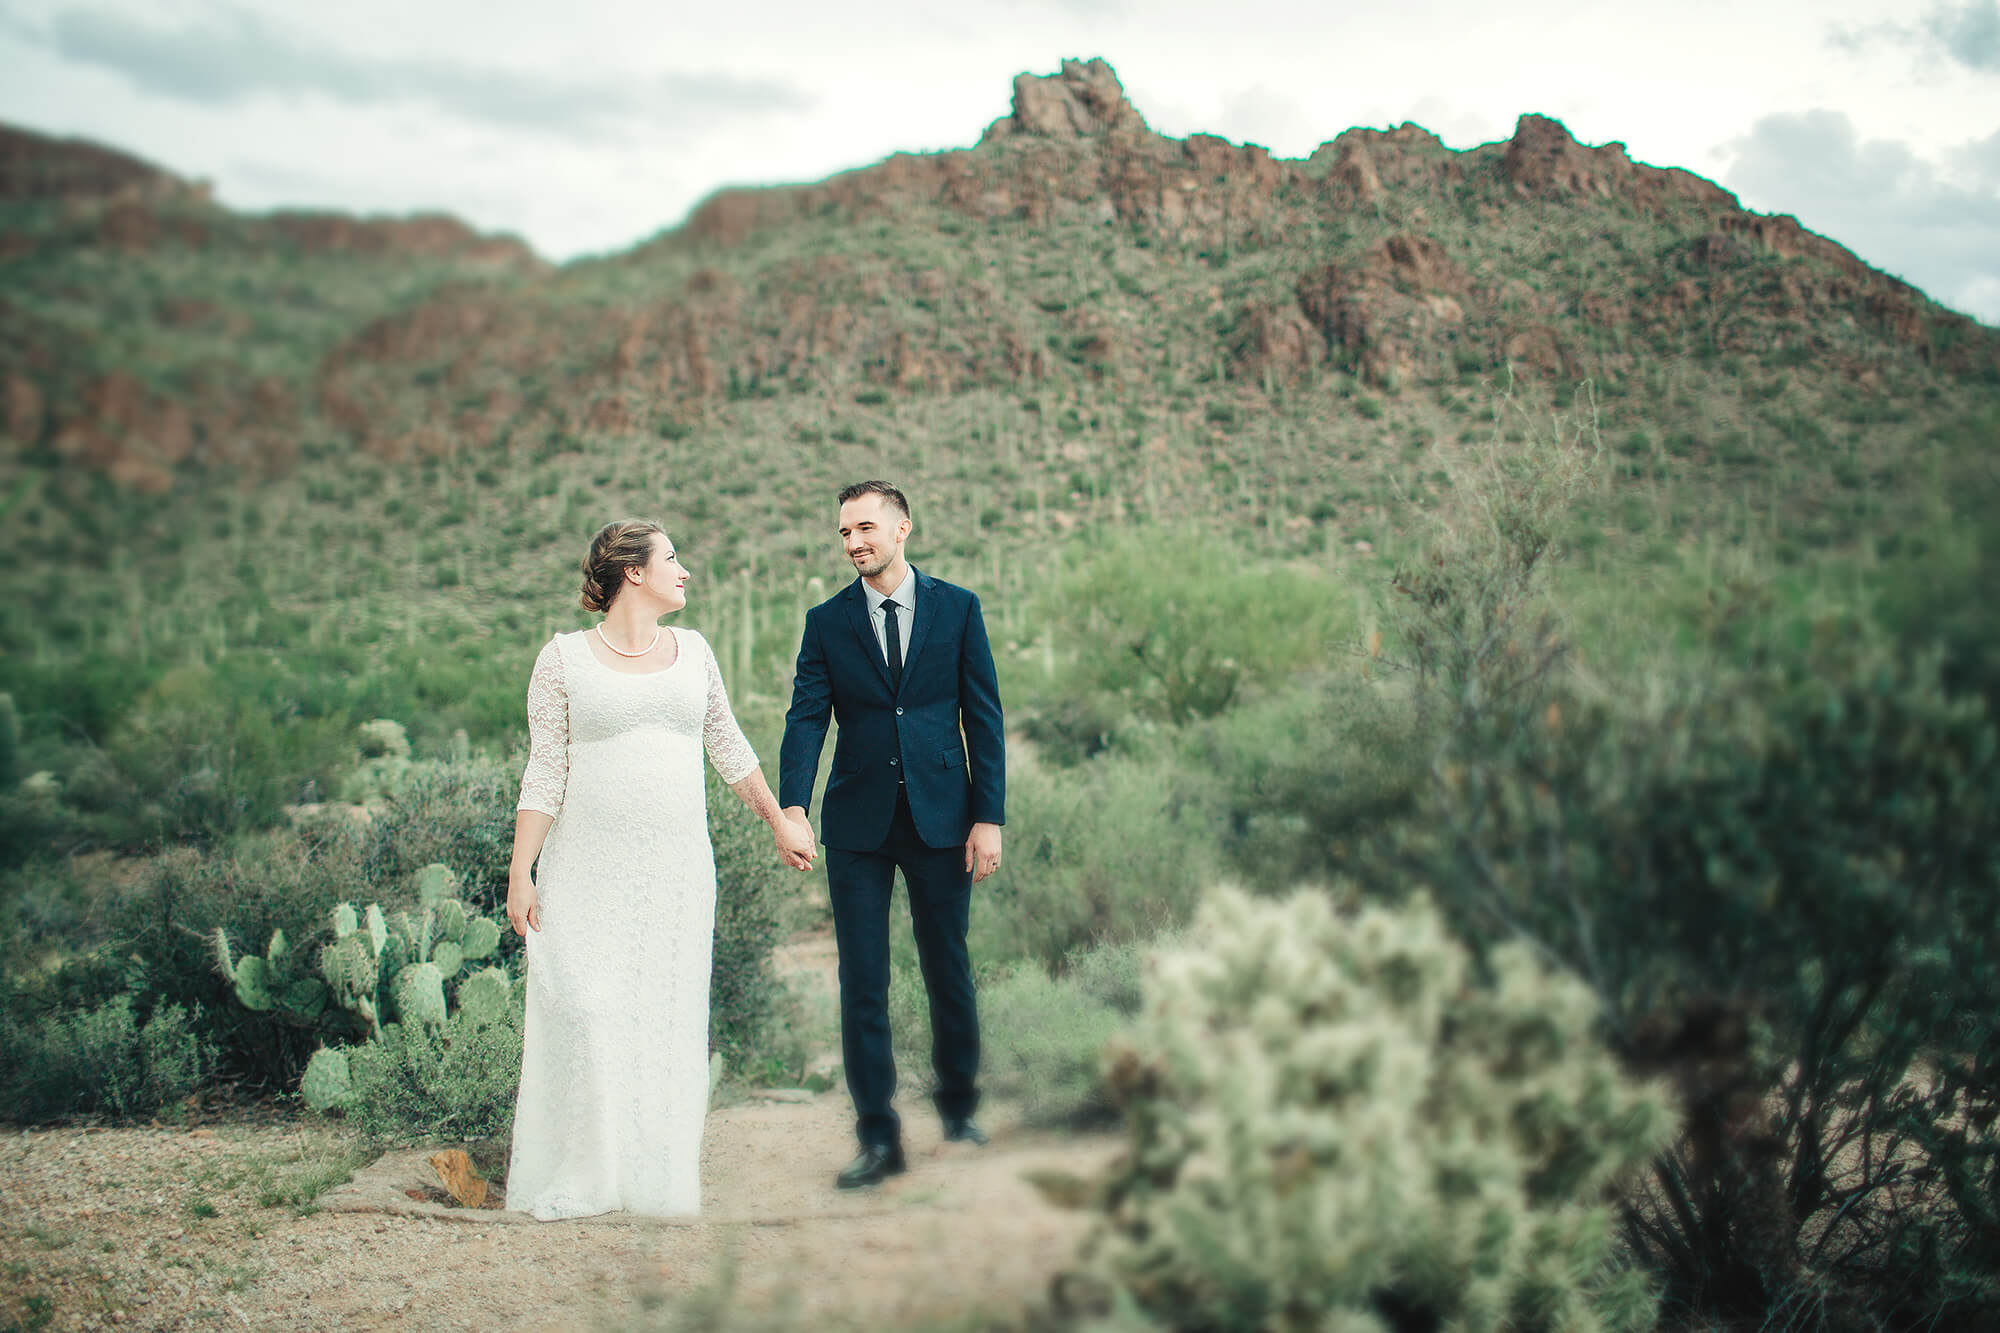 Beautiful rocky peaks were a stunning backdrop for their desert elopement session in Tucson.